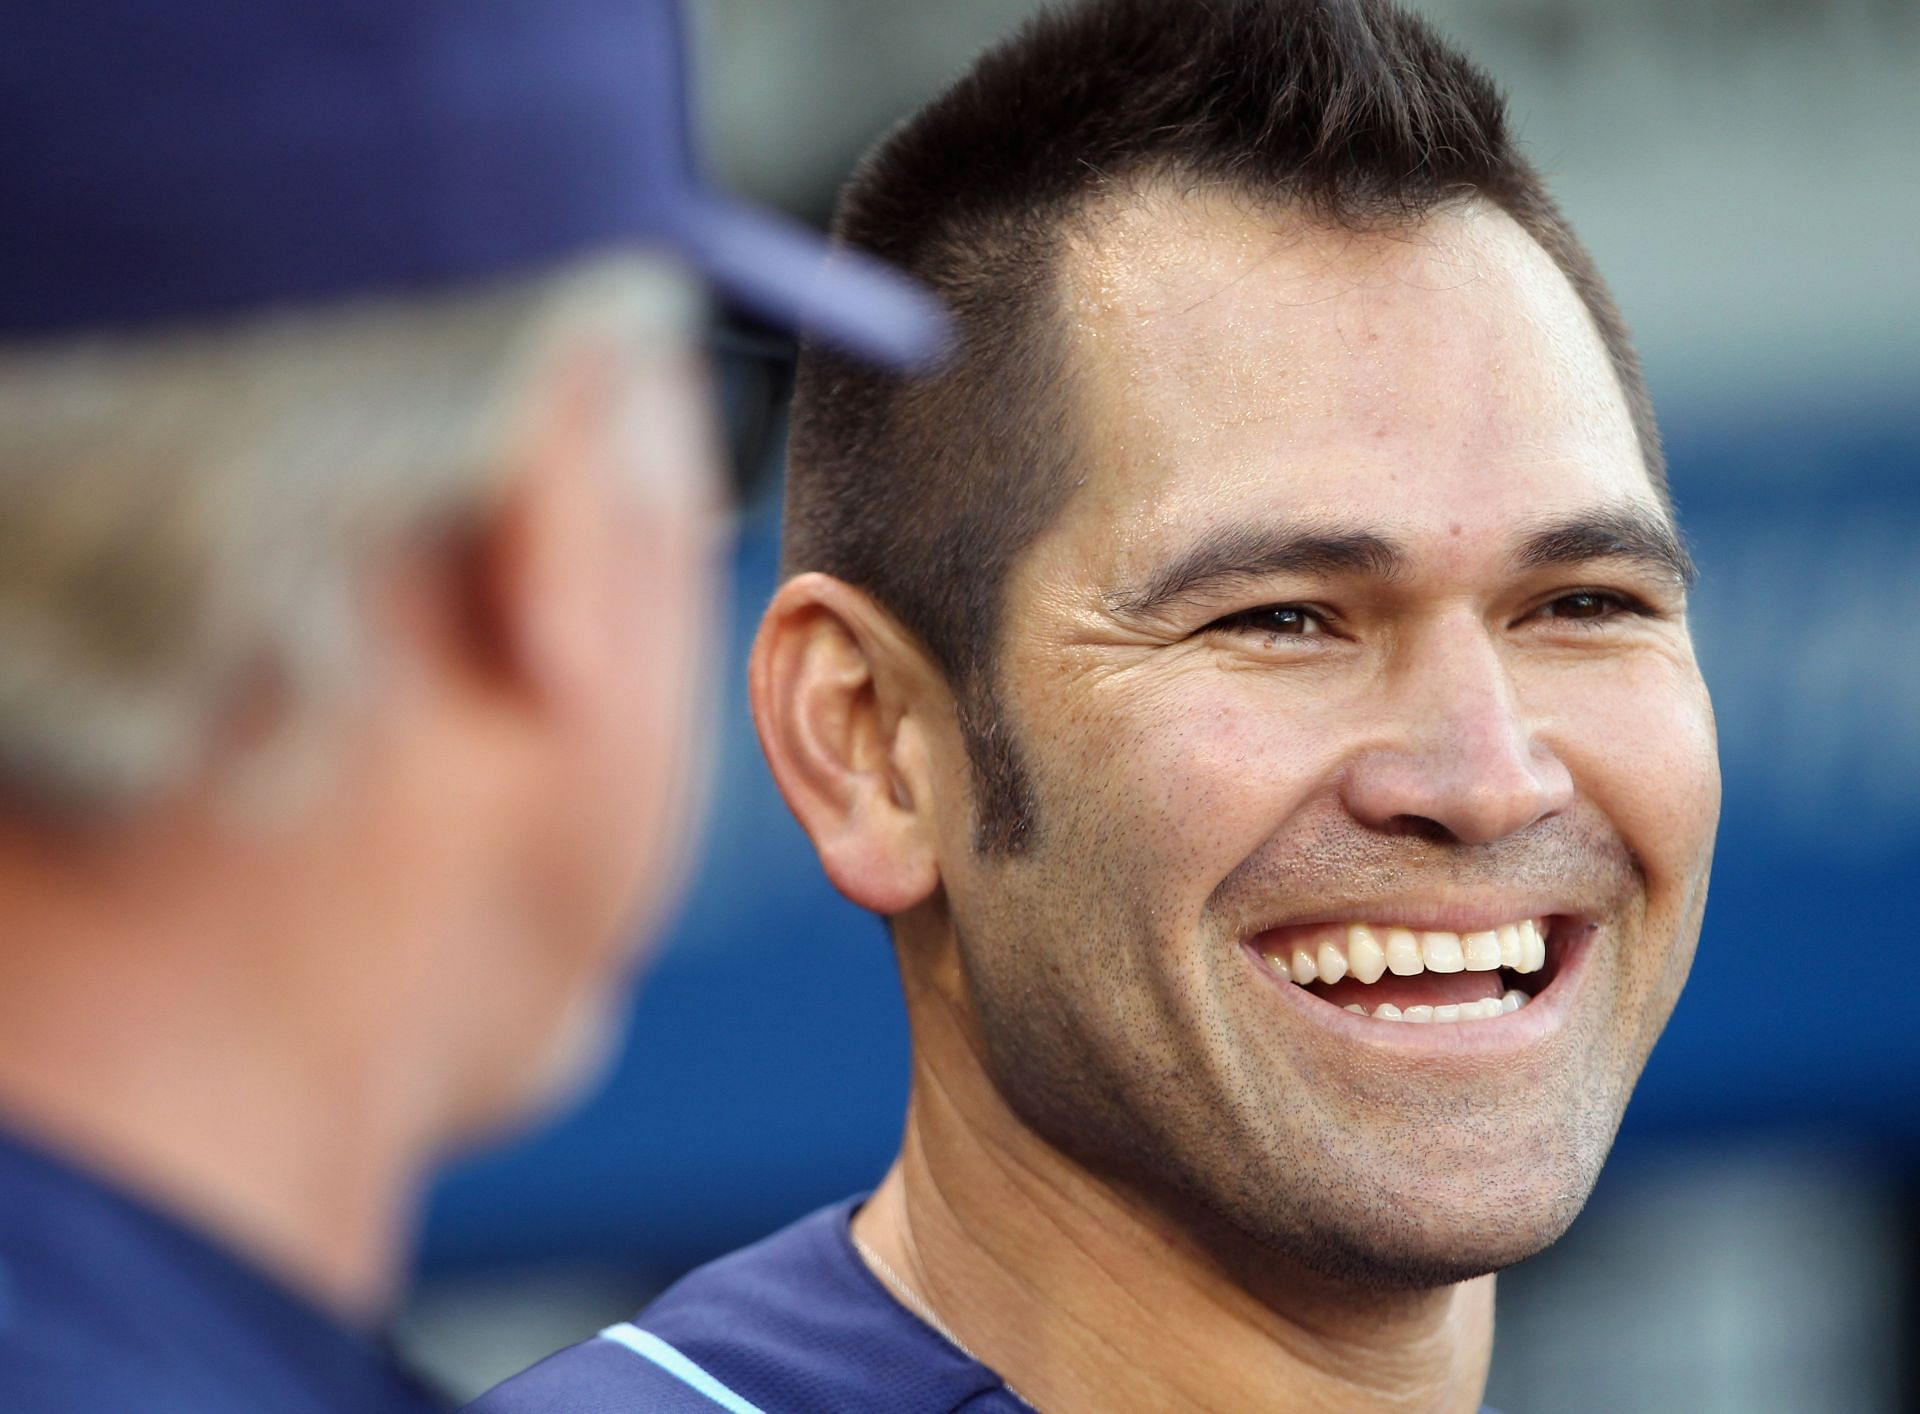 Johnny Damon claimed DUI arrest was because he's a Trump supporter